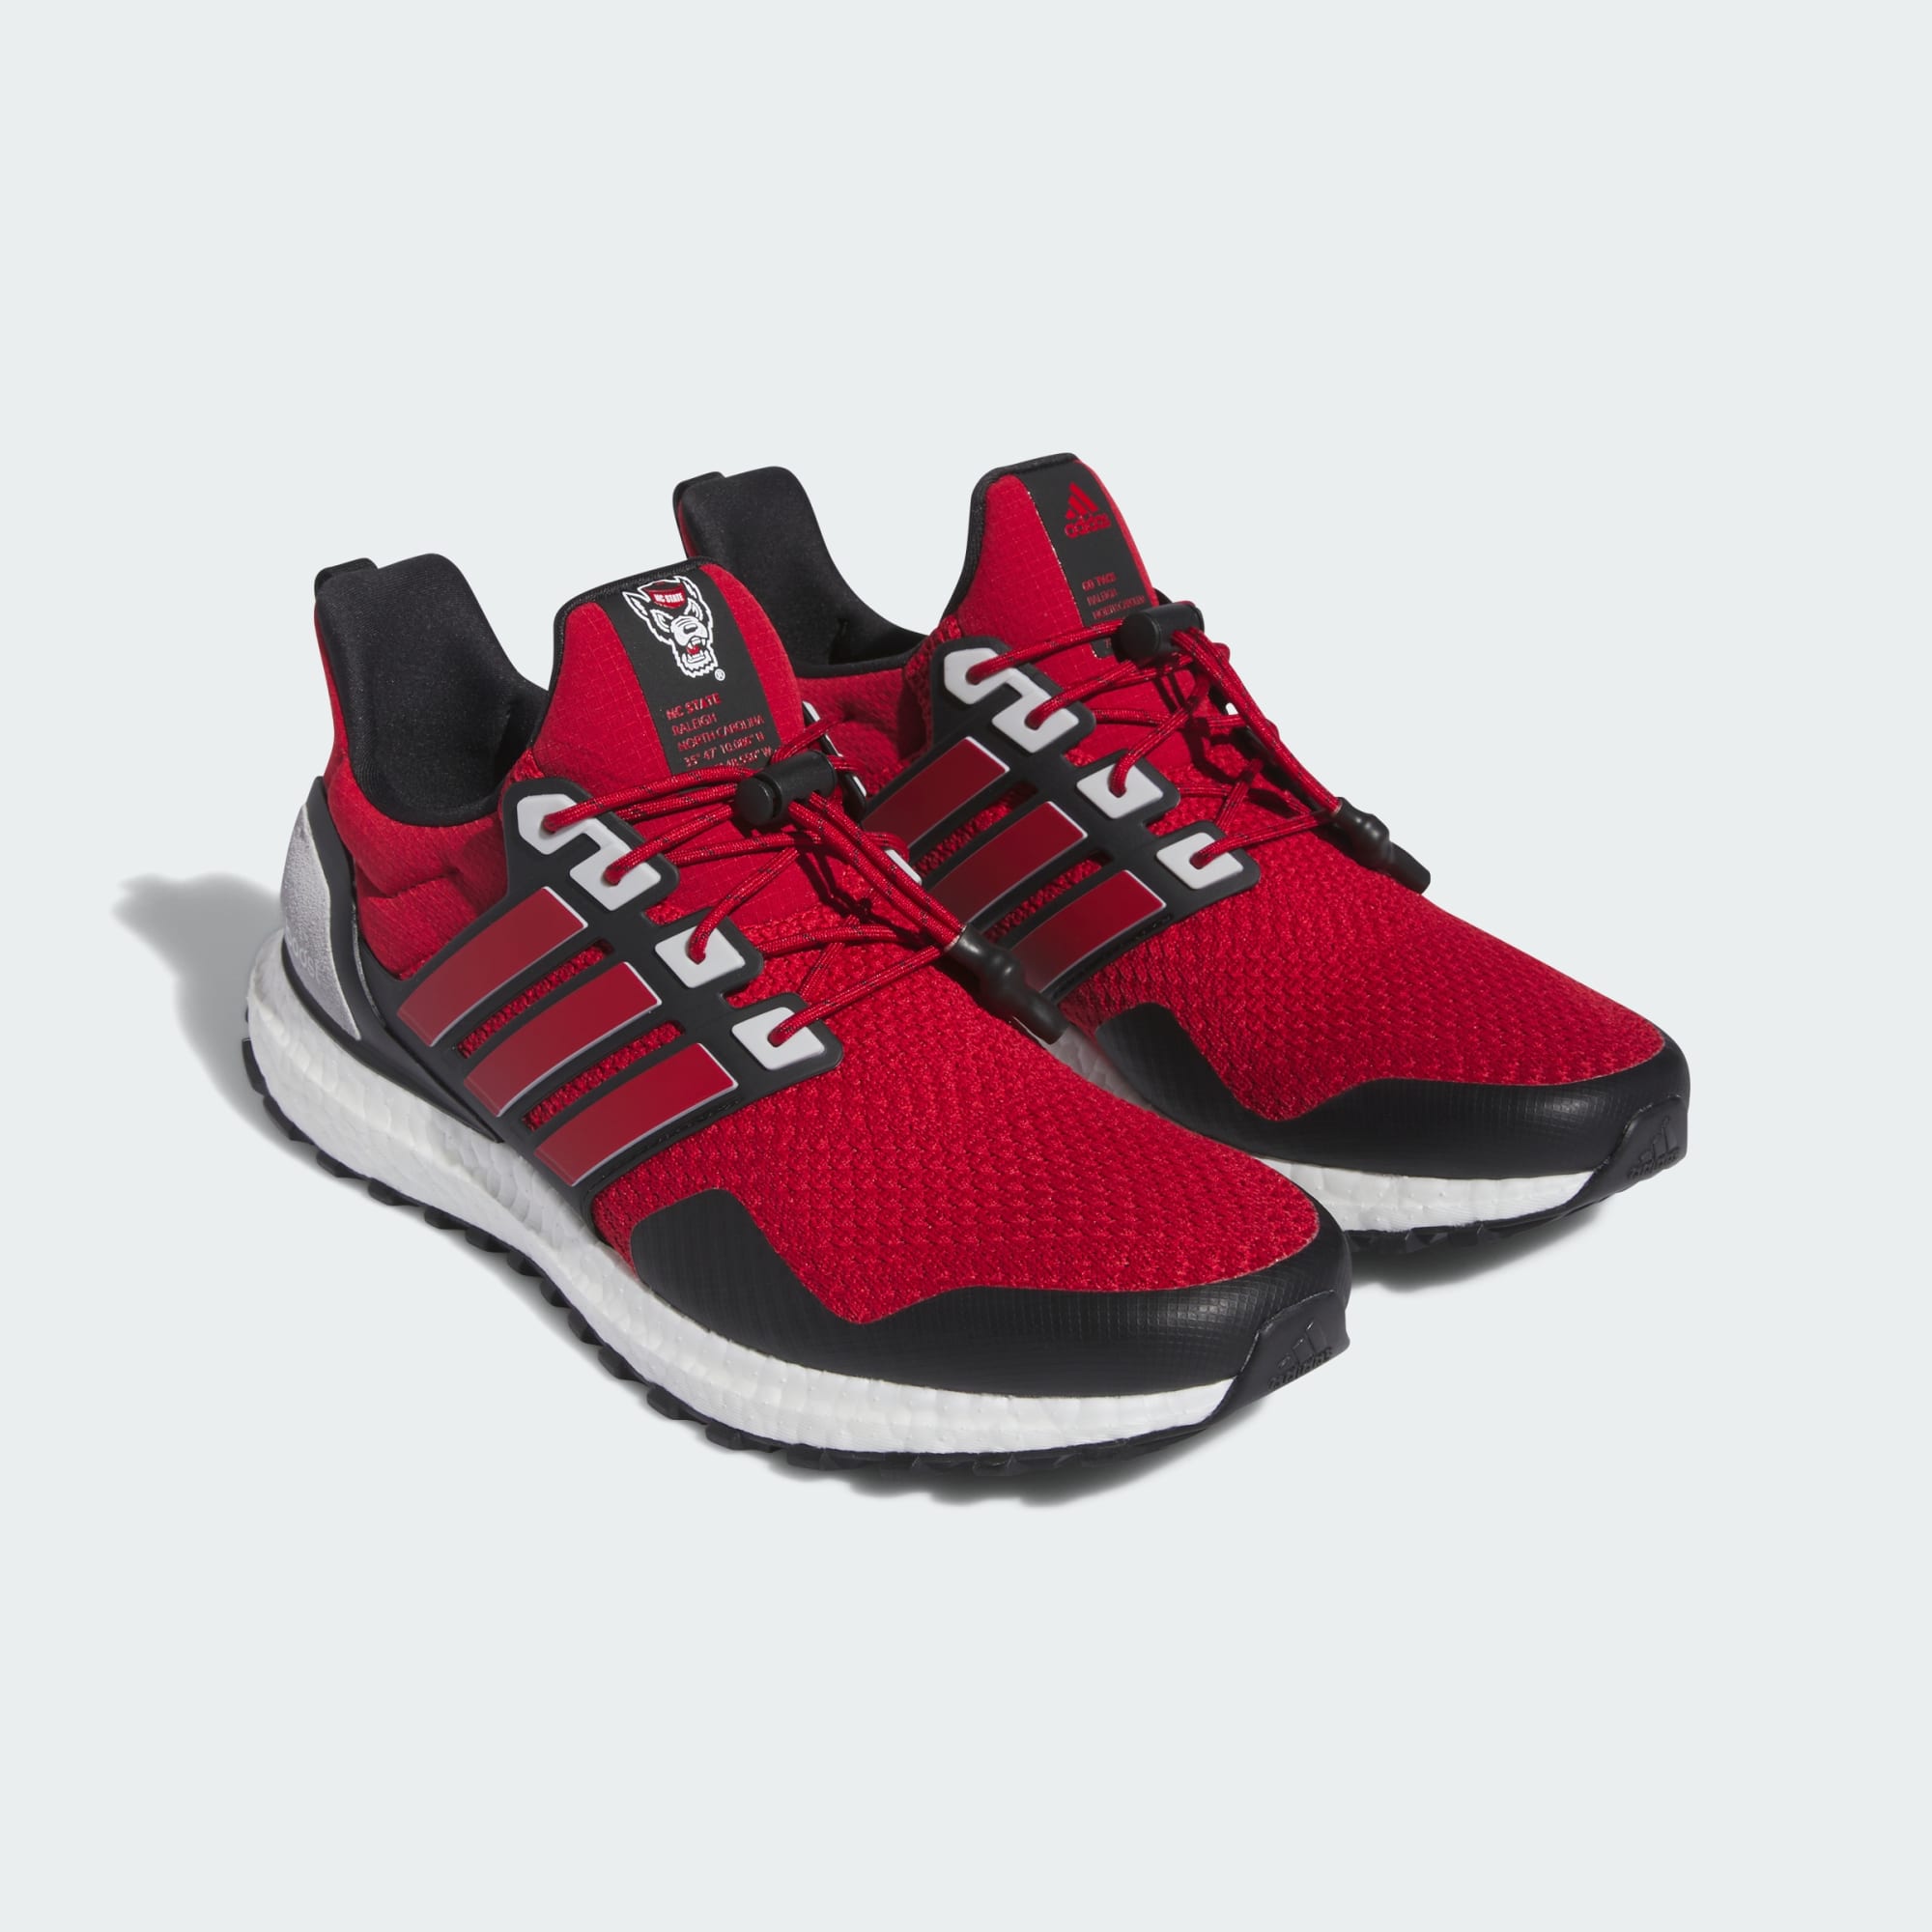 NC_State_Ultraboost_1.0_Shoes_Red_IG5878_04_standard.jpg